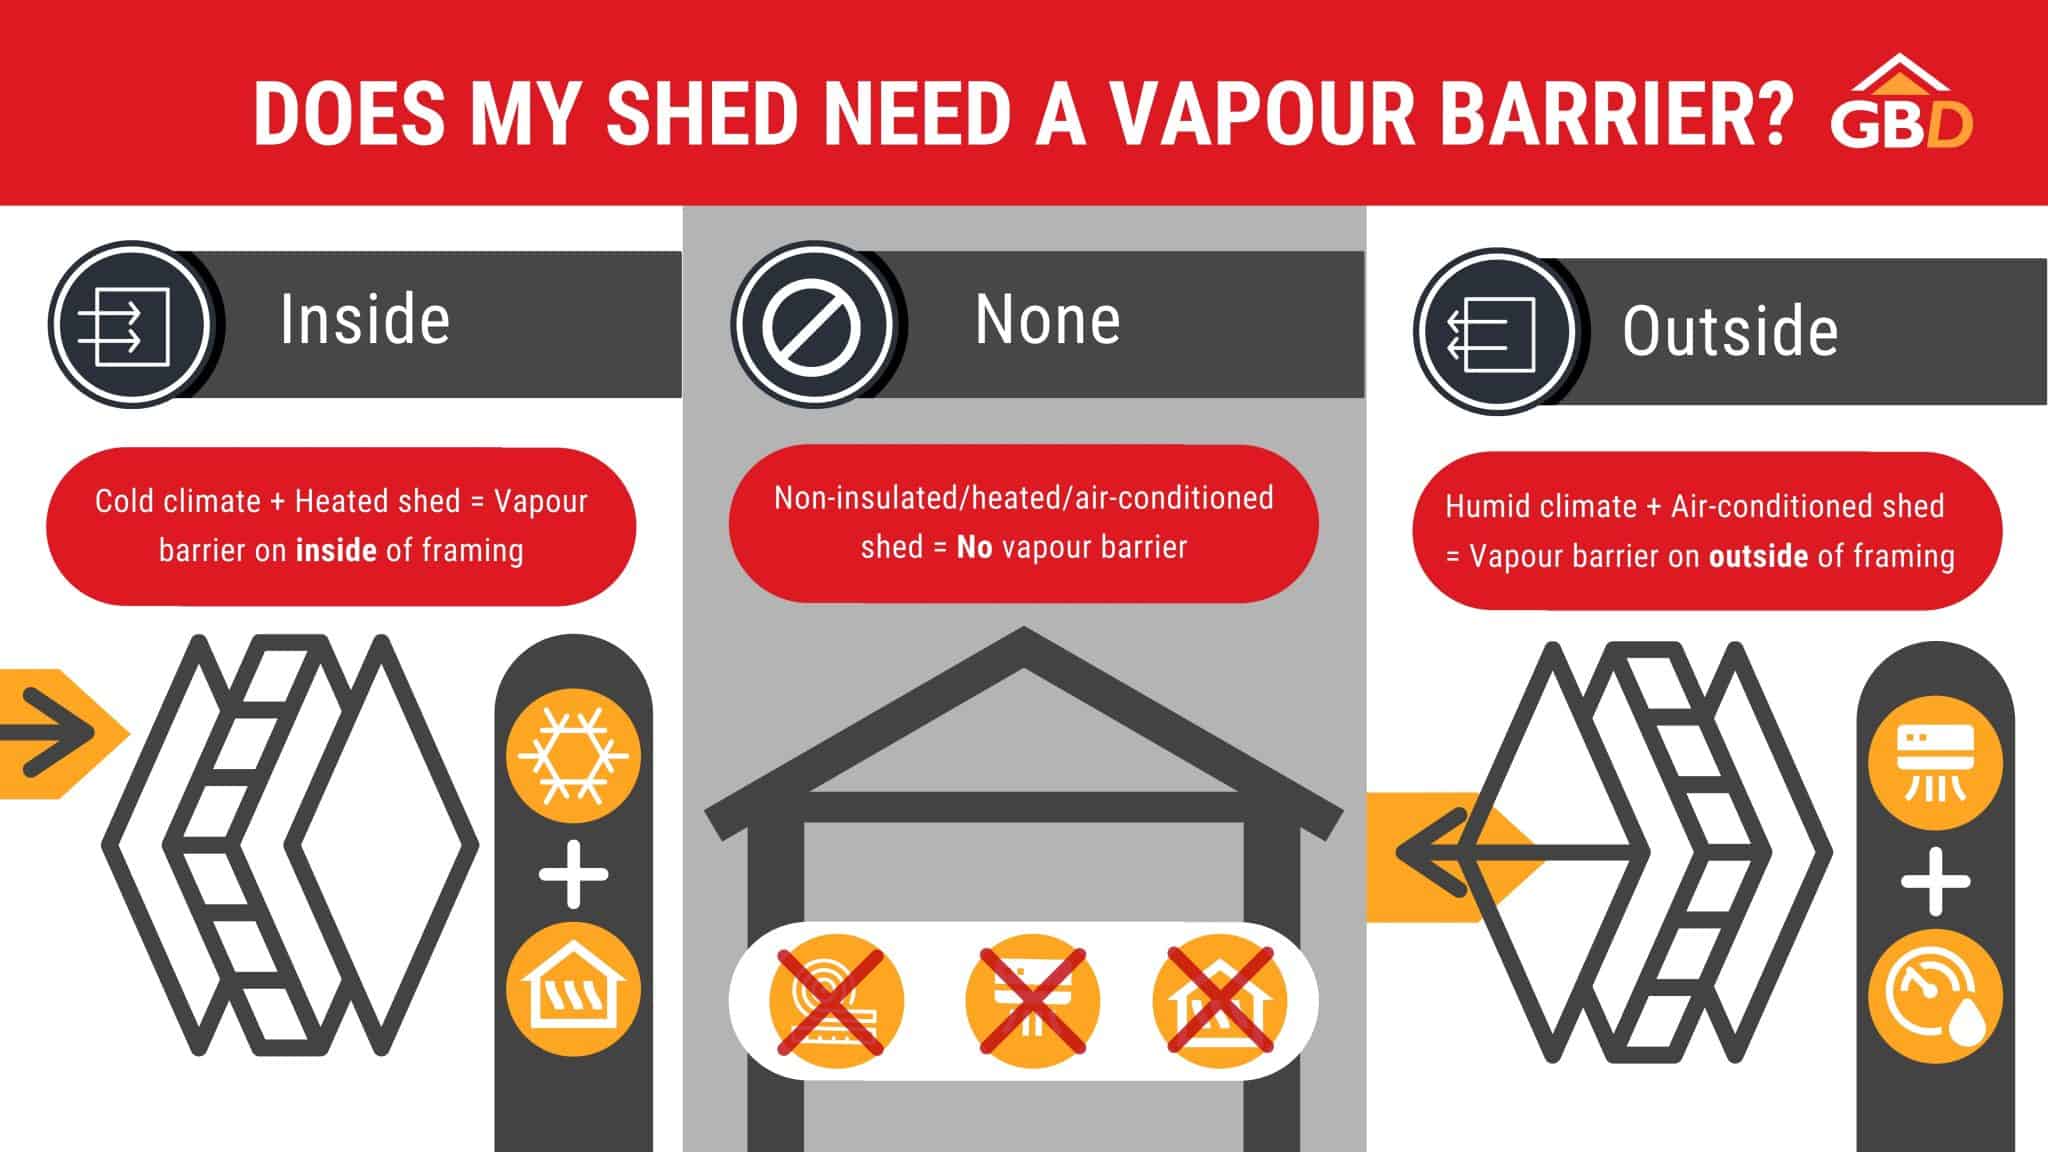 Does my shed need a vapour barrier Garden Buildings Direct infographic with three tiles for different sheds and climates with icons and arrows regarding air flow, insulation, and vapour barriers